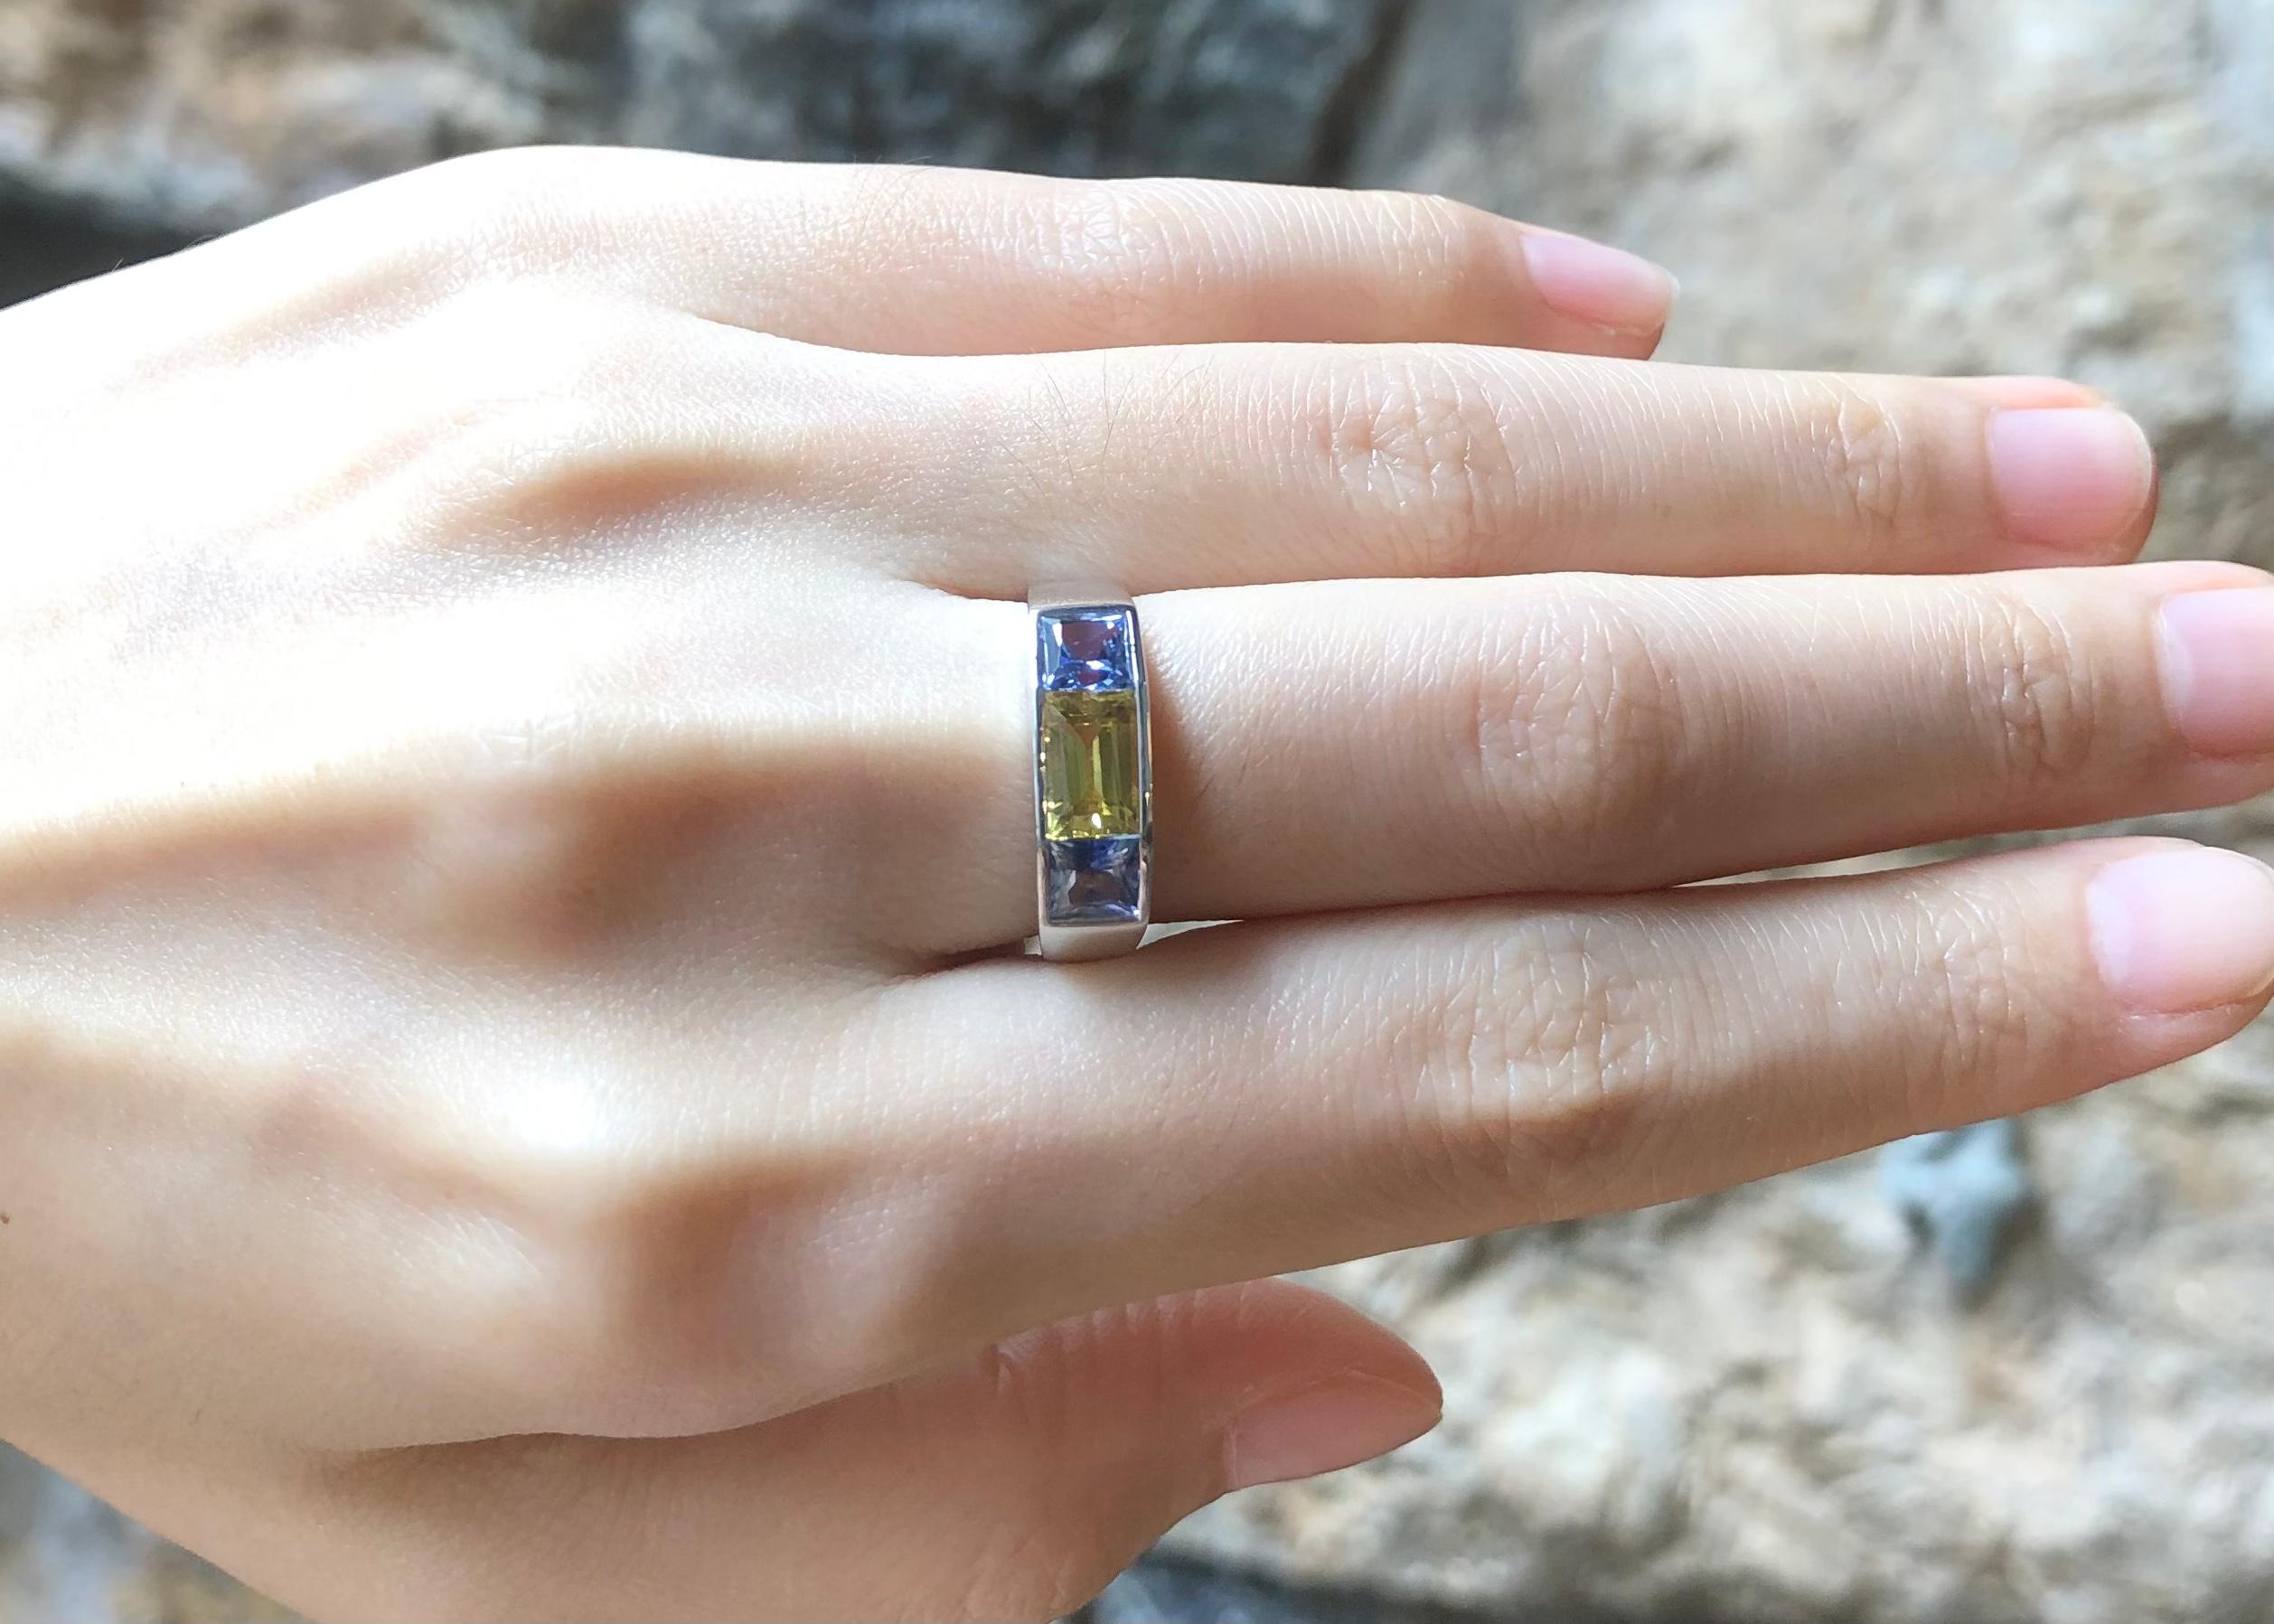 Blue Sapphire 1.13 carats with Yellow Sapphire 1.17 carats Ring set in 18K White Gold Settings

Width:  1.6 cm 
Length: 0.5 cm
Ring Size: 54
Total Weight: 5.25 grams

